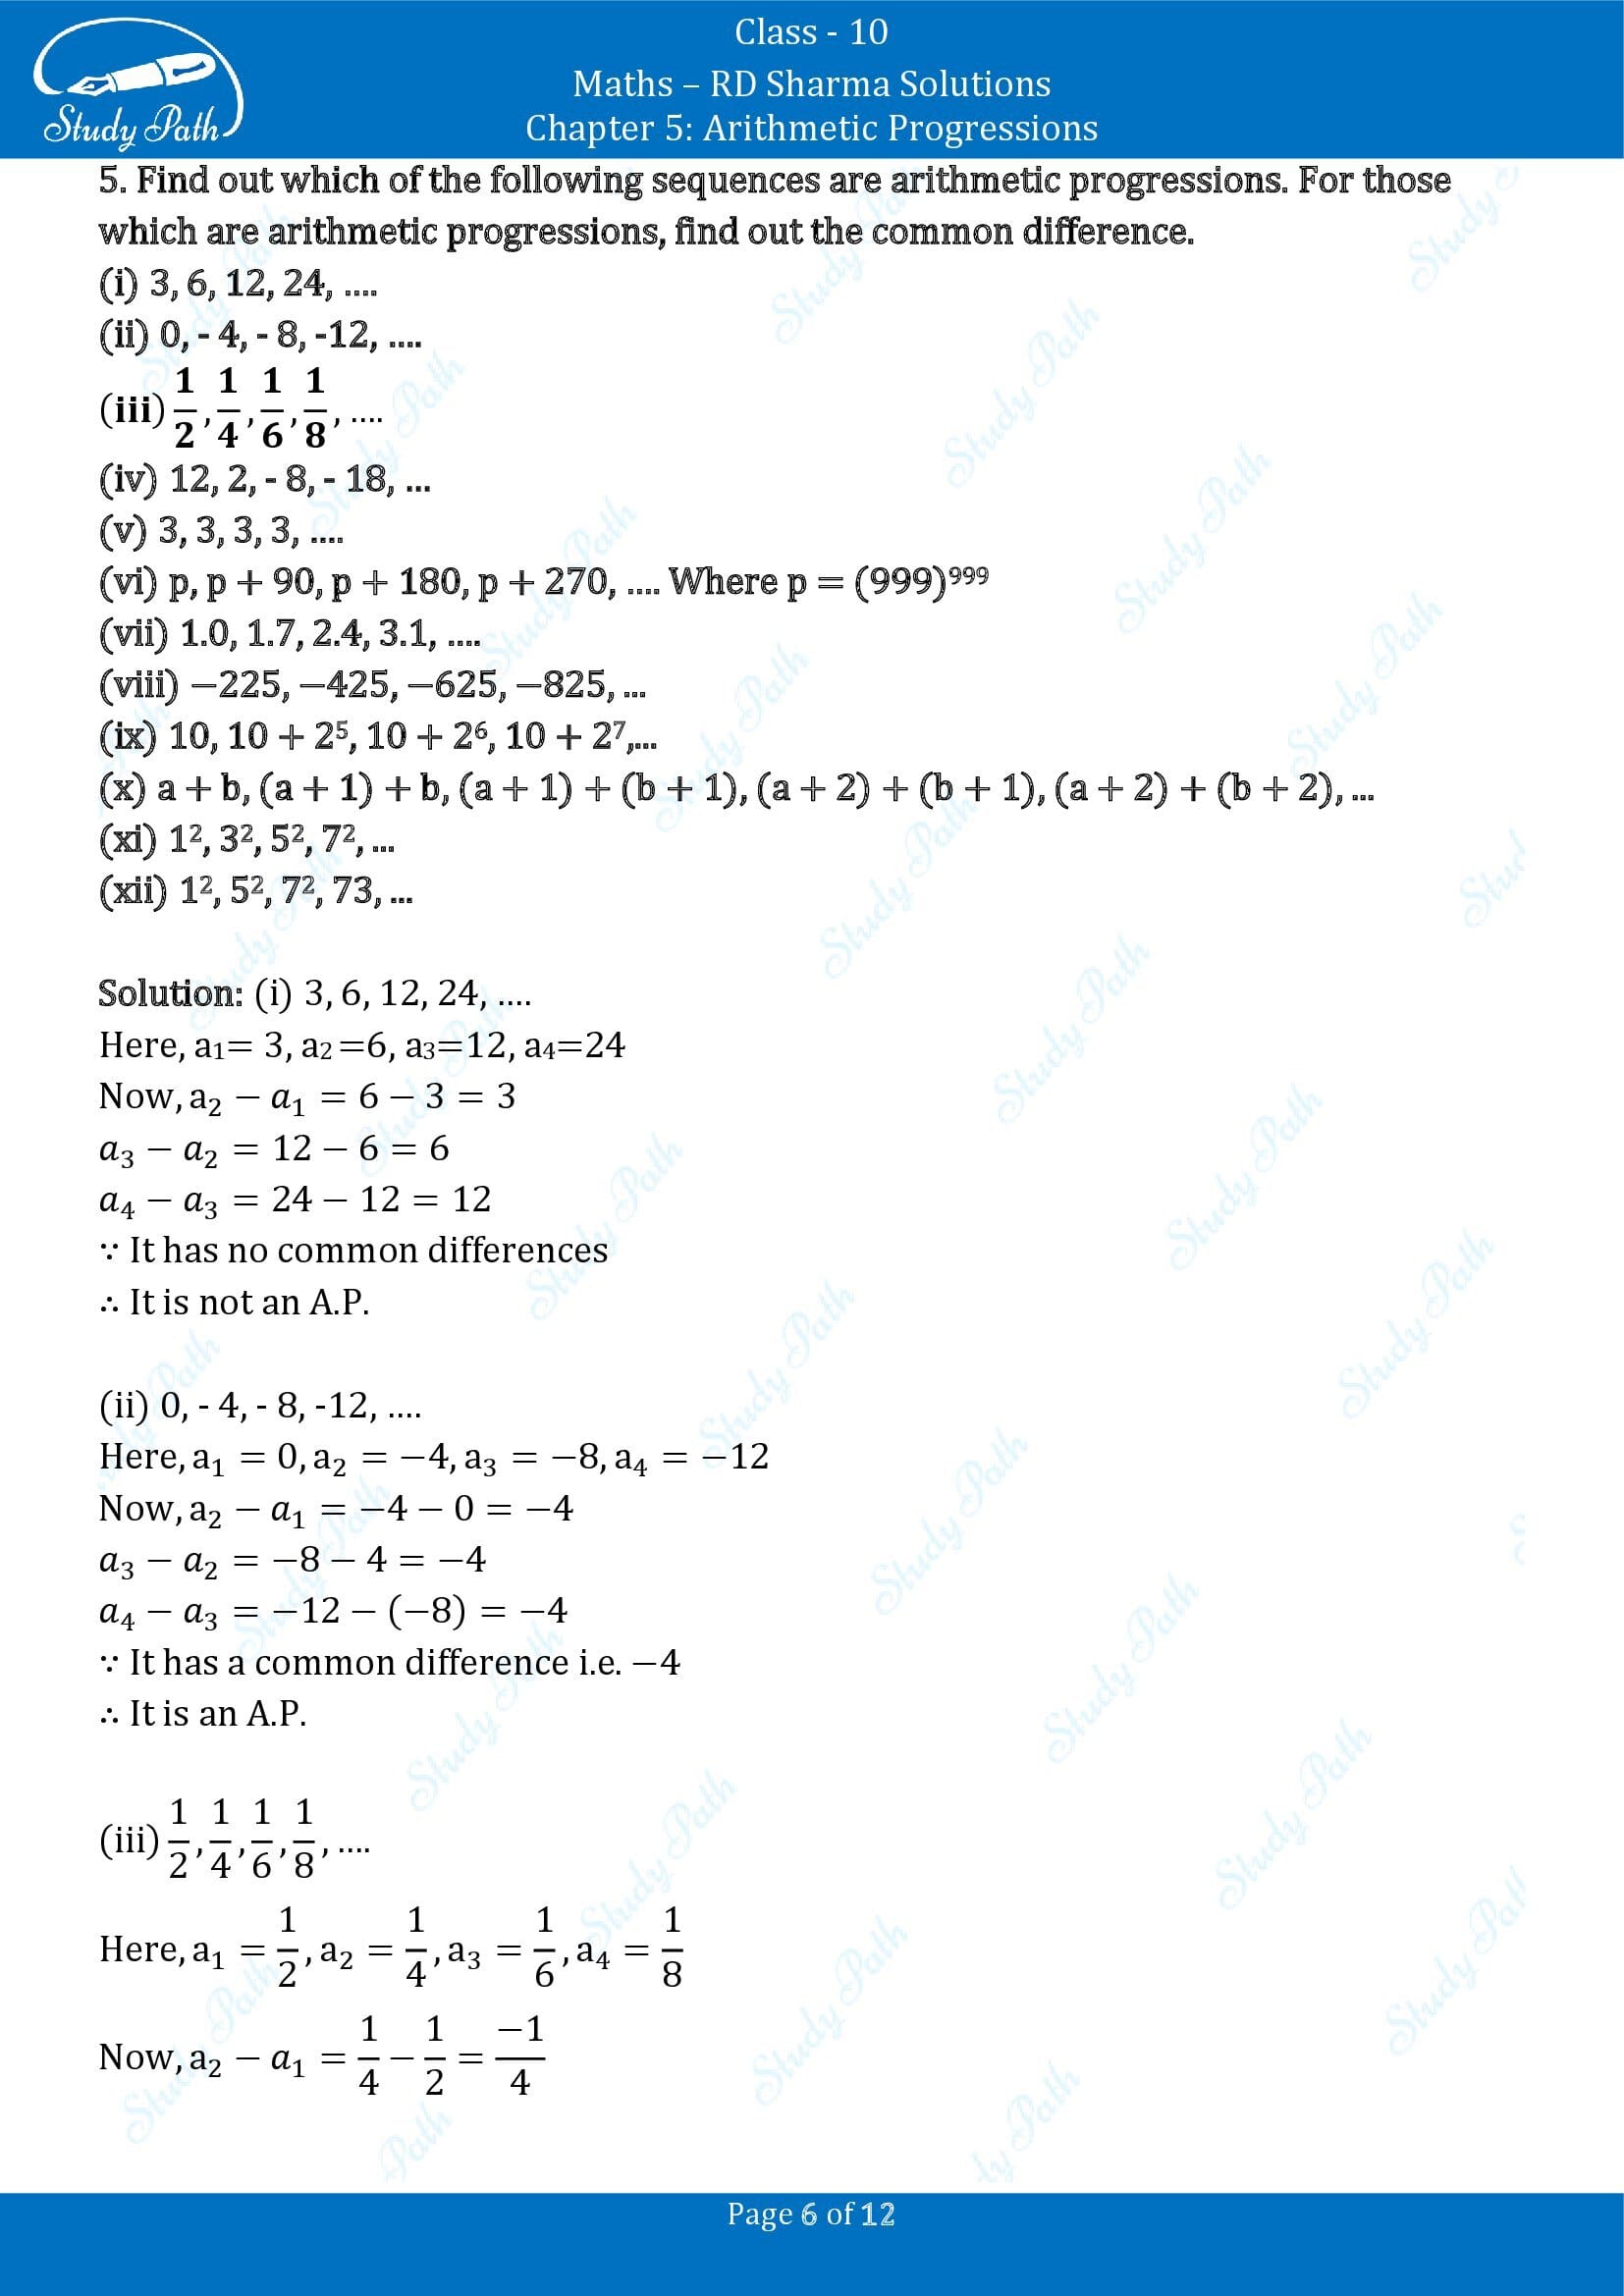 RD Sharma Solutions Class 10 Chapter 5 Arithmetic Progressions Exercise 5.3 00006